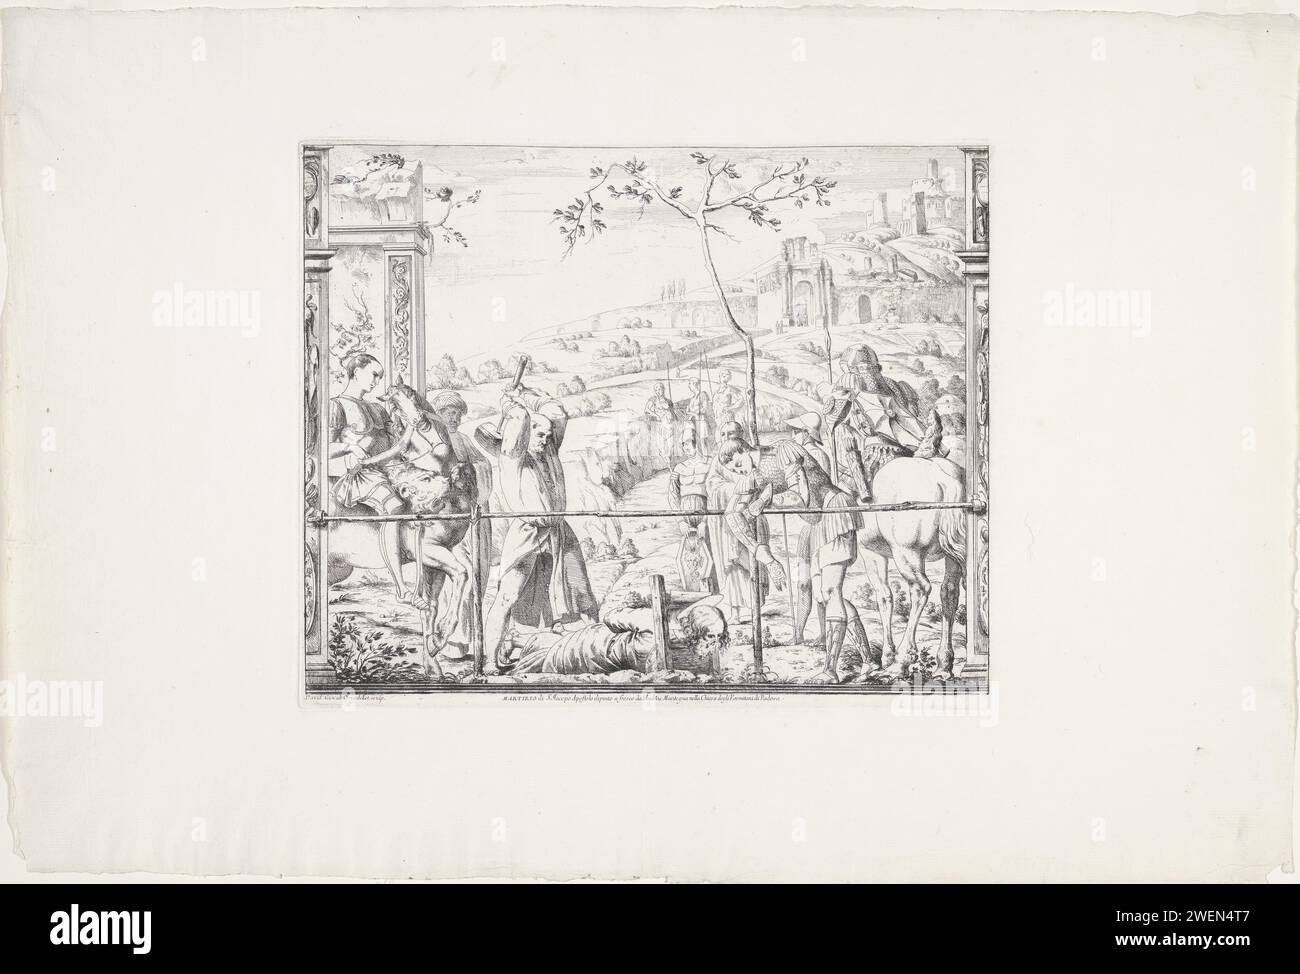 Martyrdom of Saint Jakobus, Giovanni David, after Andrea Mantegna, 1776 print The Apostle James is lying with his head under the block. A soldier raises his hammer to behead him. Soldiers watch. Italian landscape in the background.  paper etching beheading of James Stock Photo